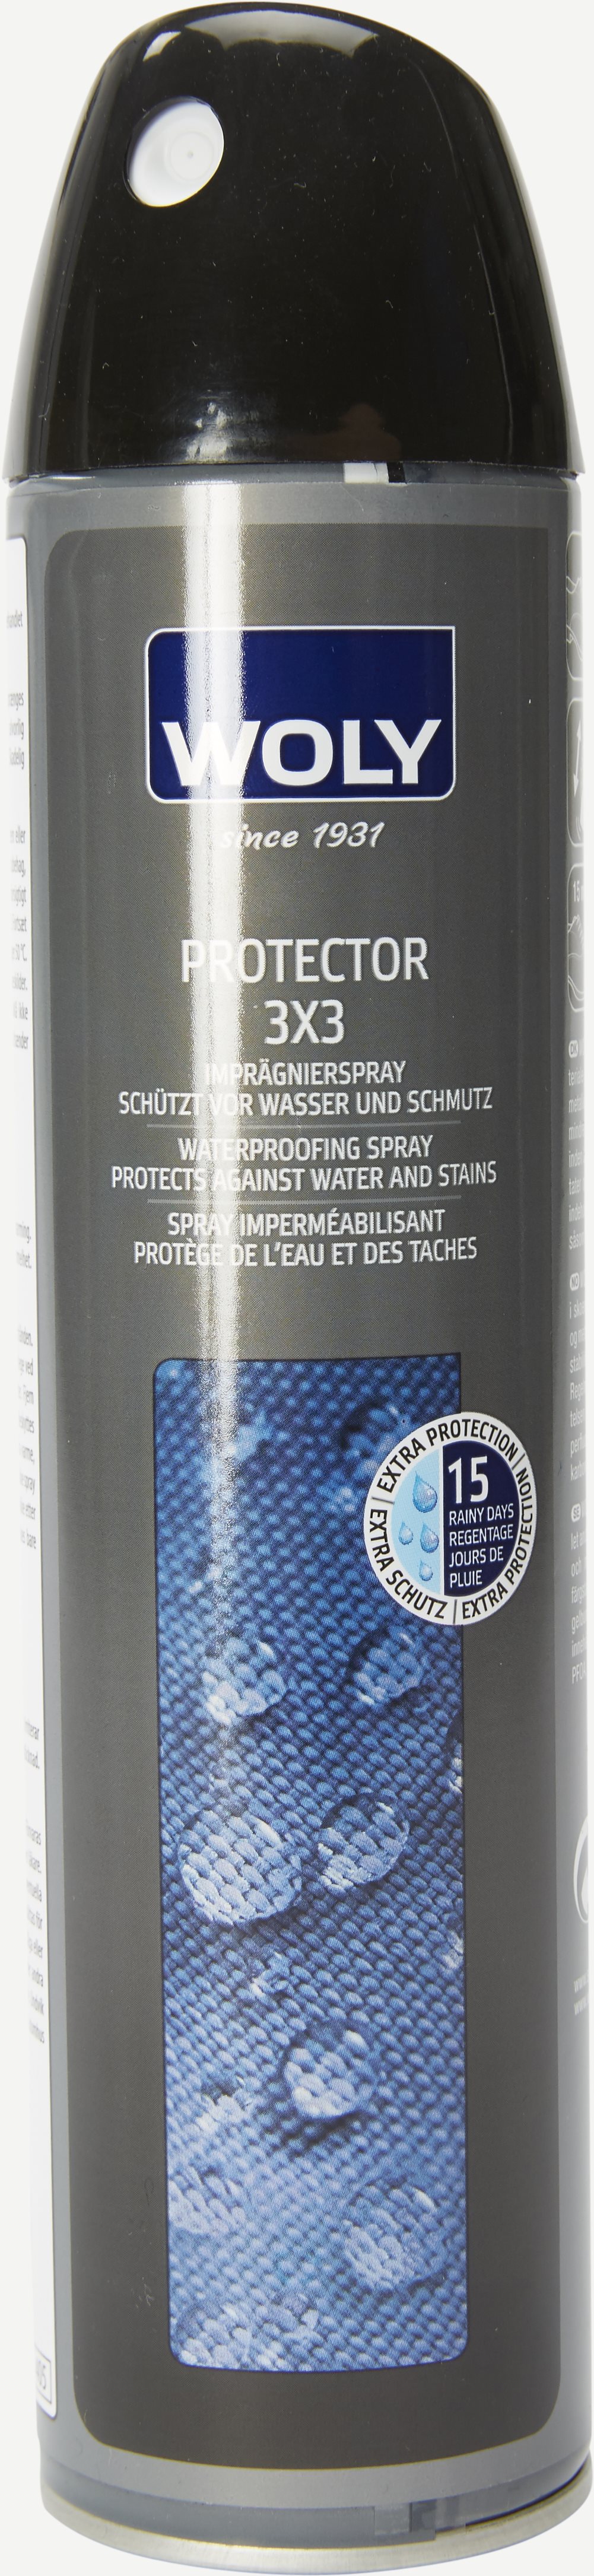 Woly Protector Accessories WOLY PROTECTOR 3X3 Grey